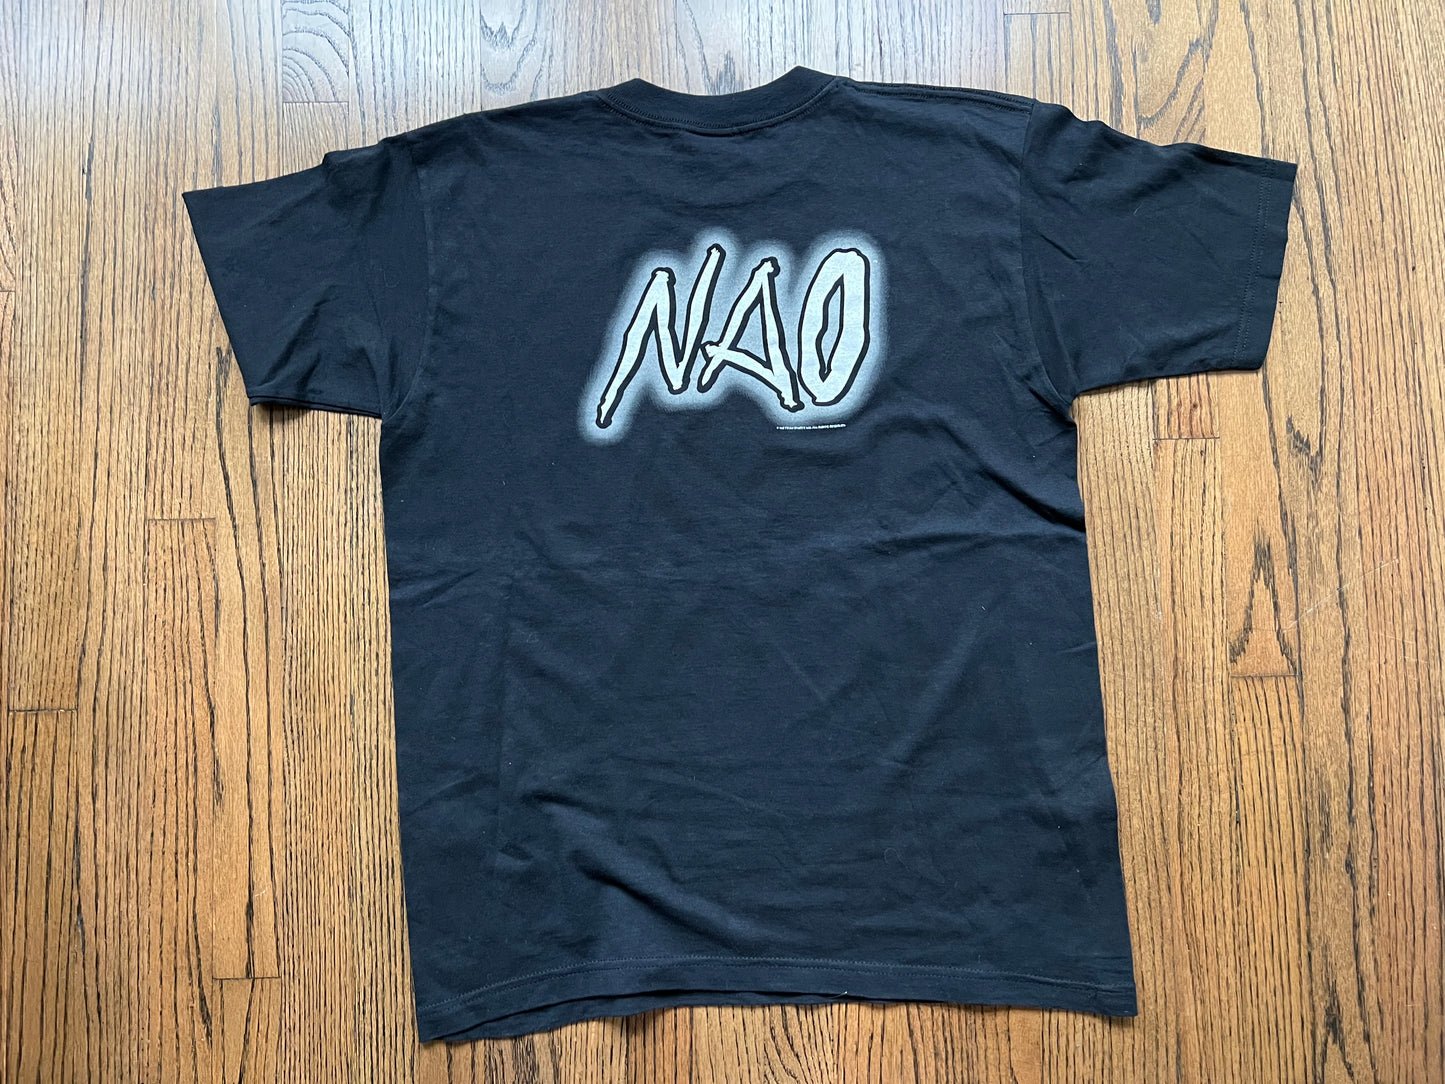 1998 WWF New Age Outlaws shirt